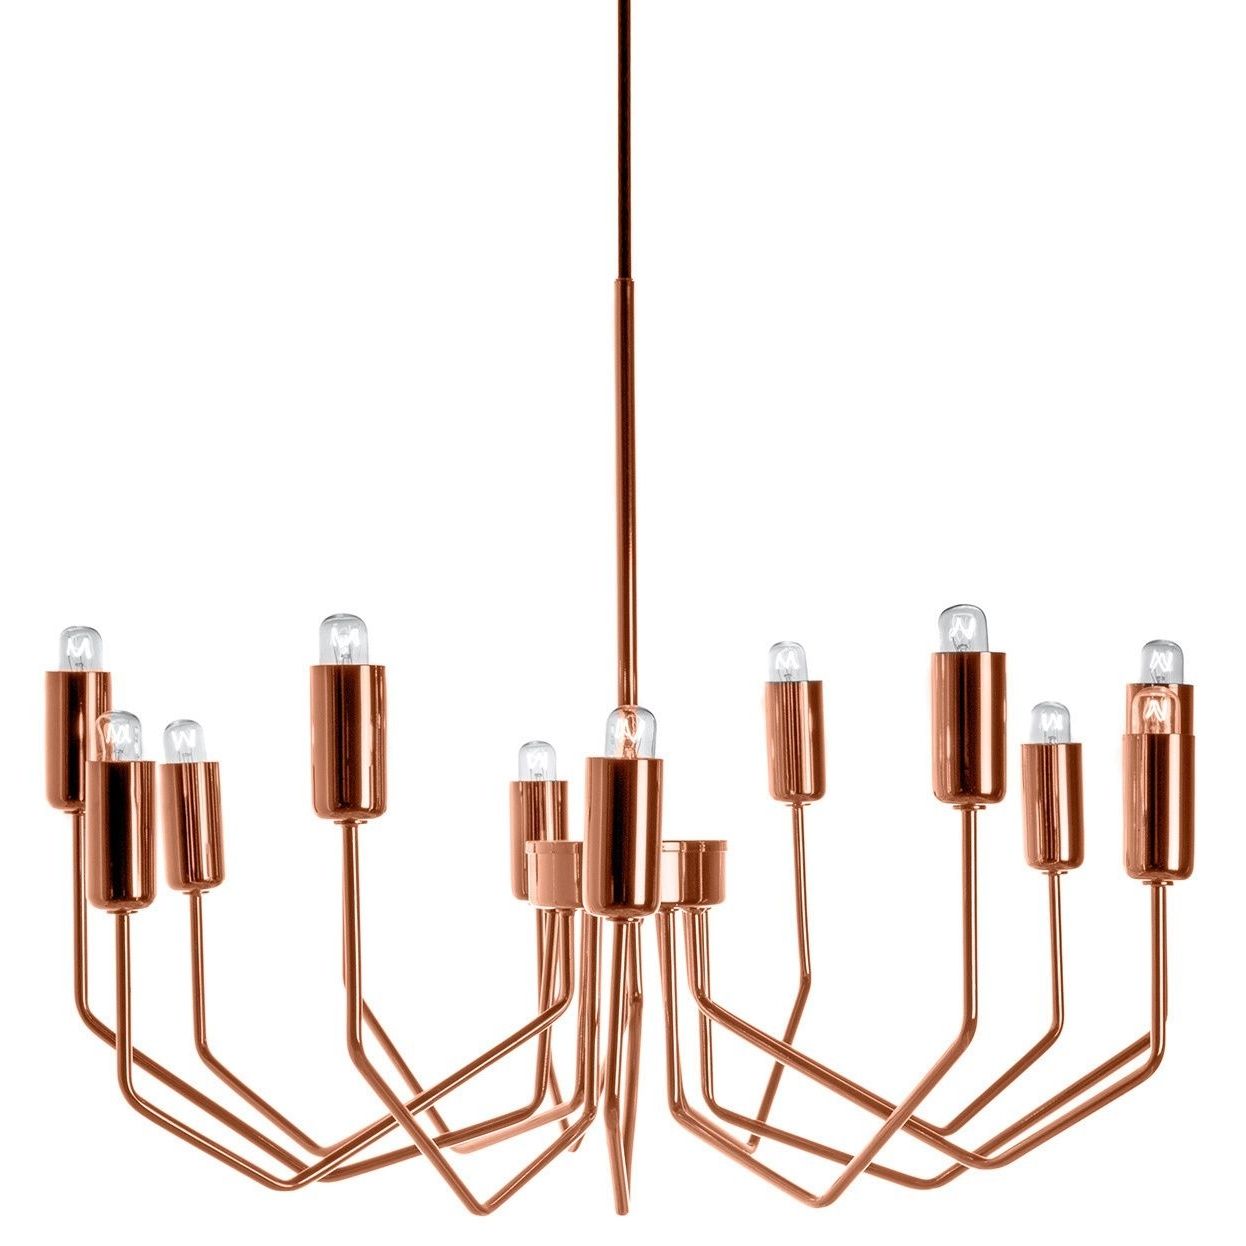 Latest Sleek And Stylish, The Olbia Chandelier In Copper Features Delicate For Copper Chandelier (View 12 of 15)